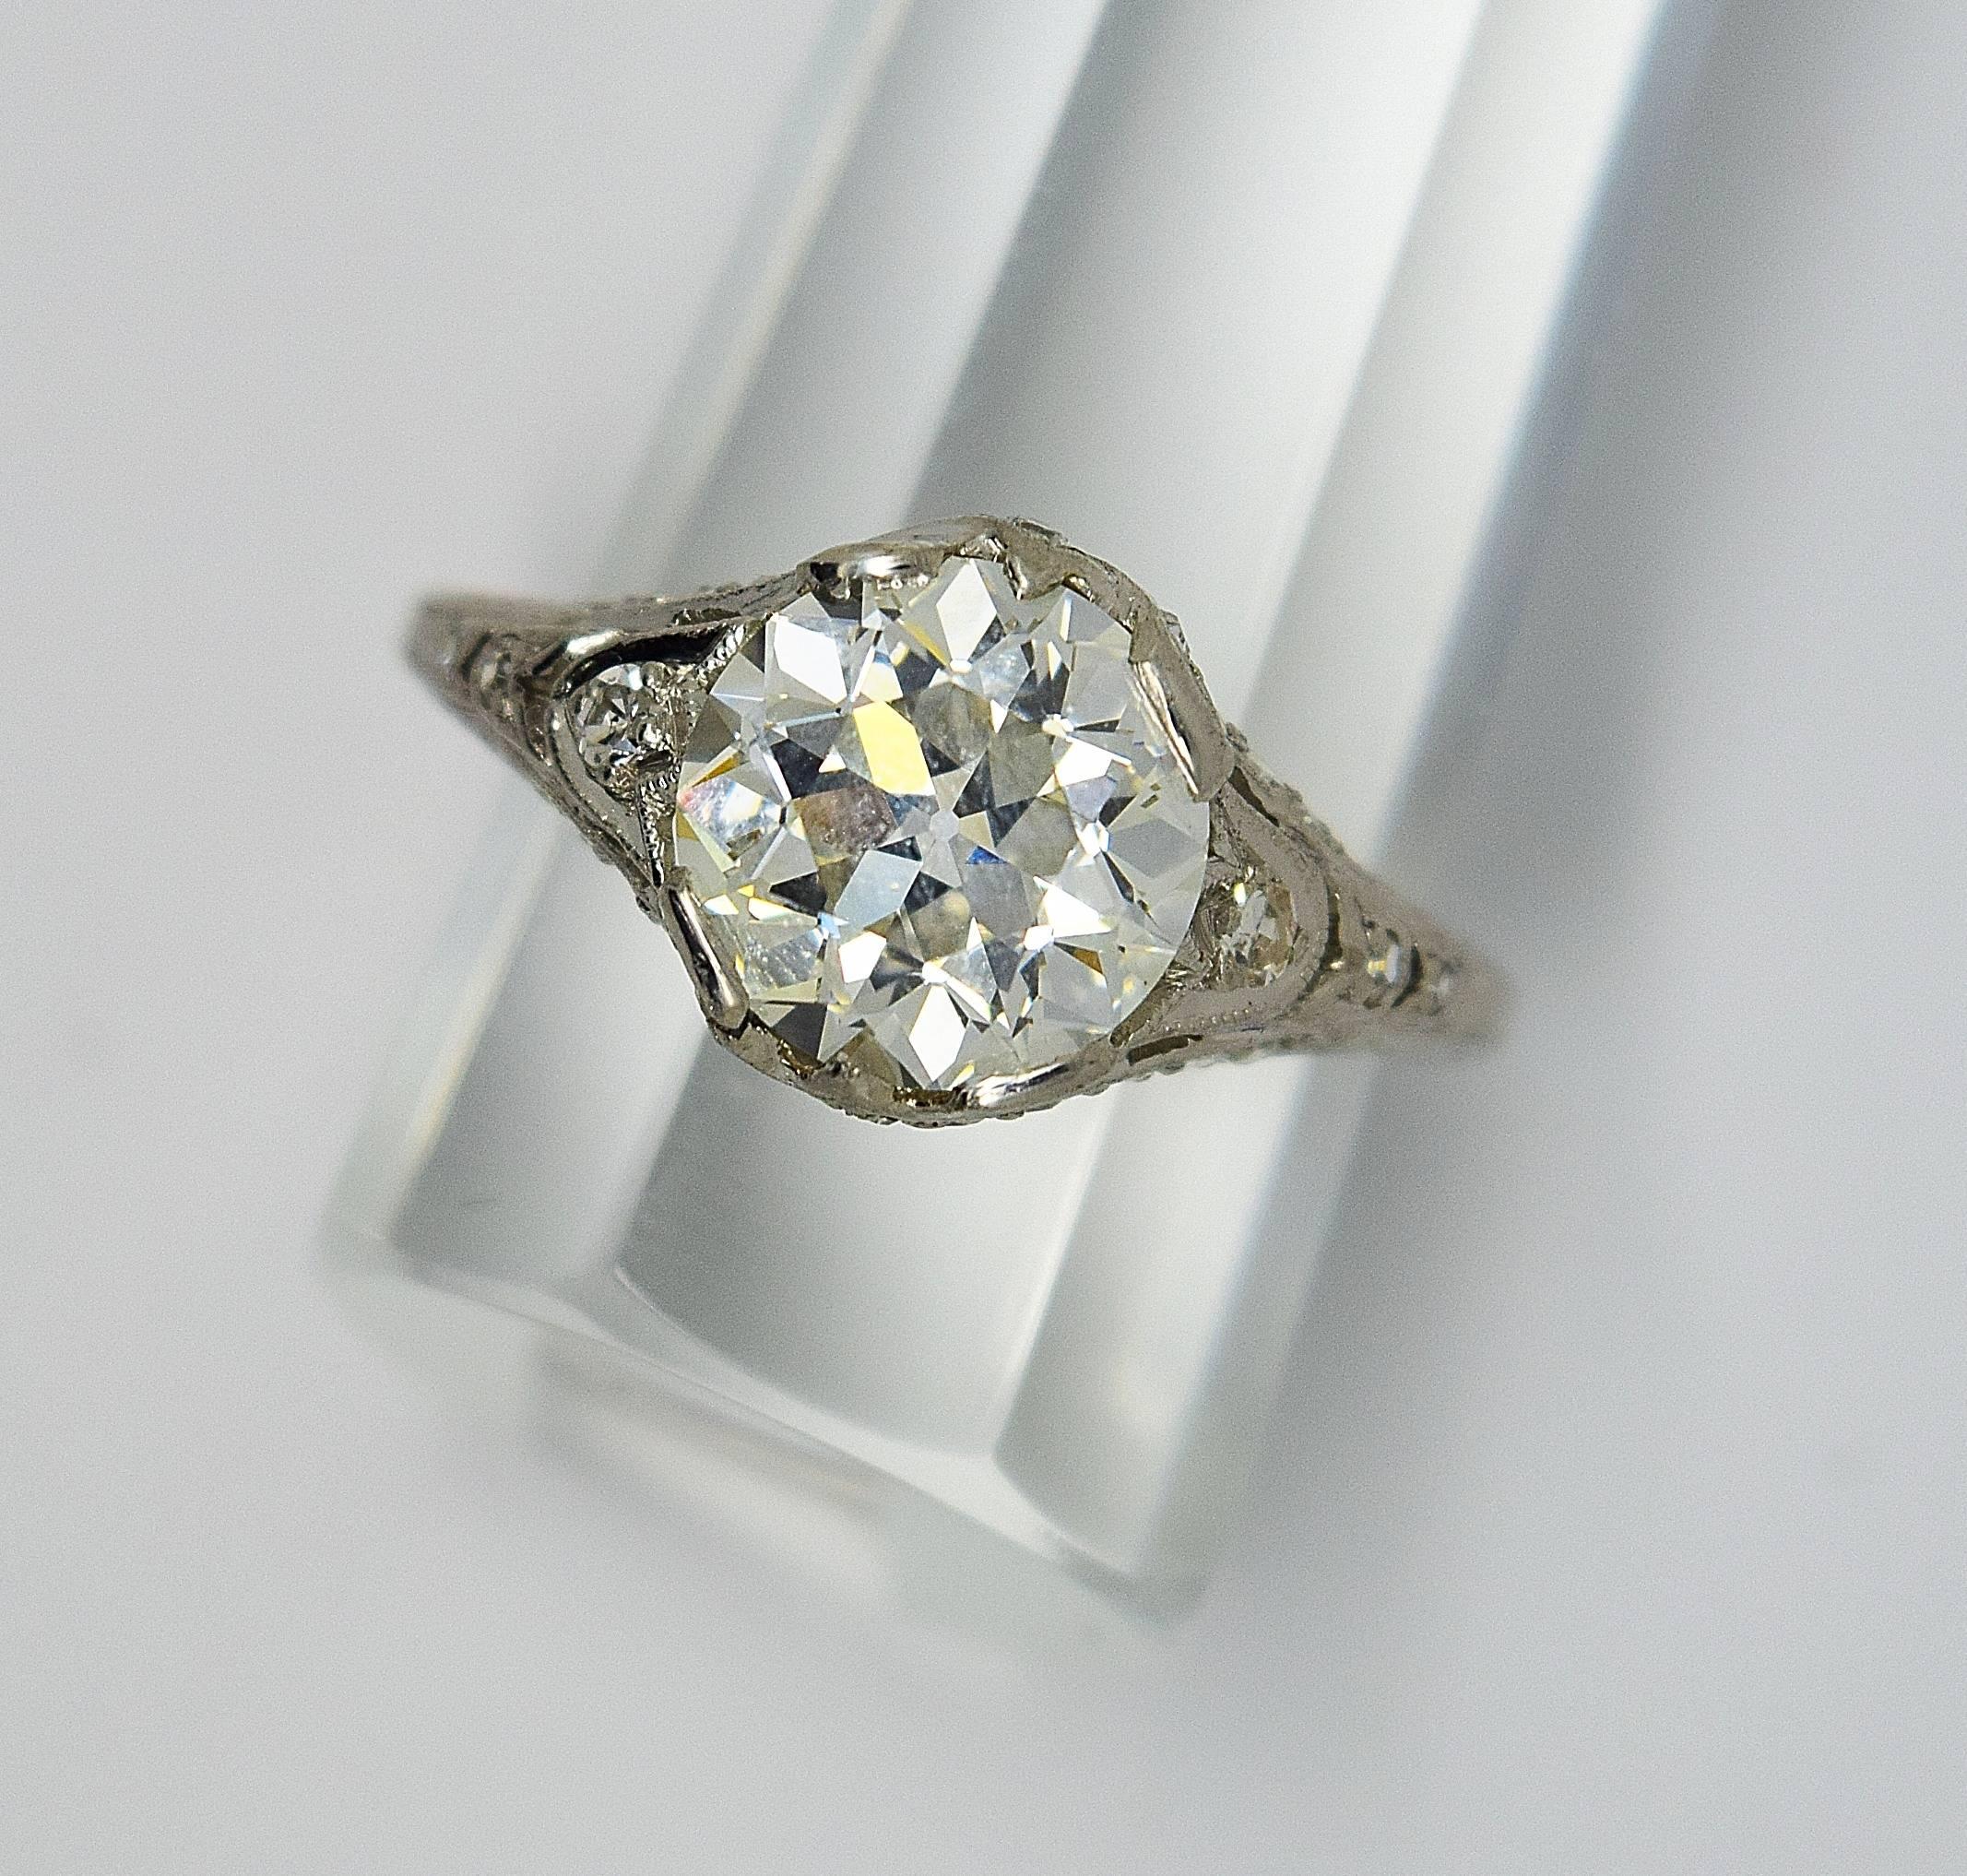 Large exceptional Art Deco old European cut diamond engagement ring set in platinum. The fine old European cut diamond is K in color and VS1 in clarity and has a GIA report #5172613450. The handmade ring has beautiful filigree and miligrain design